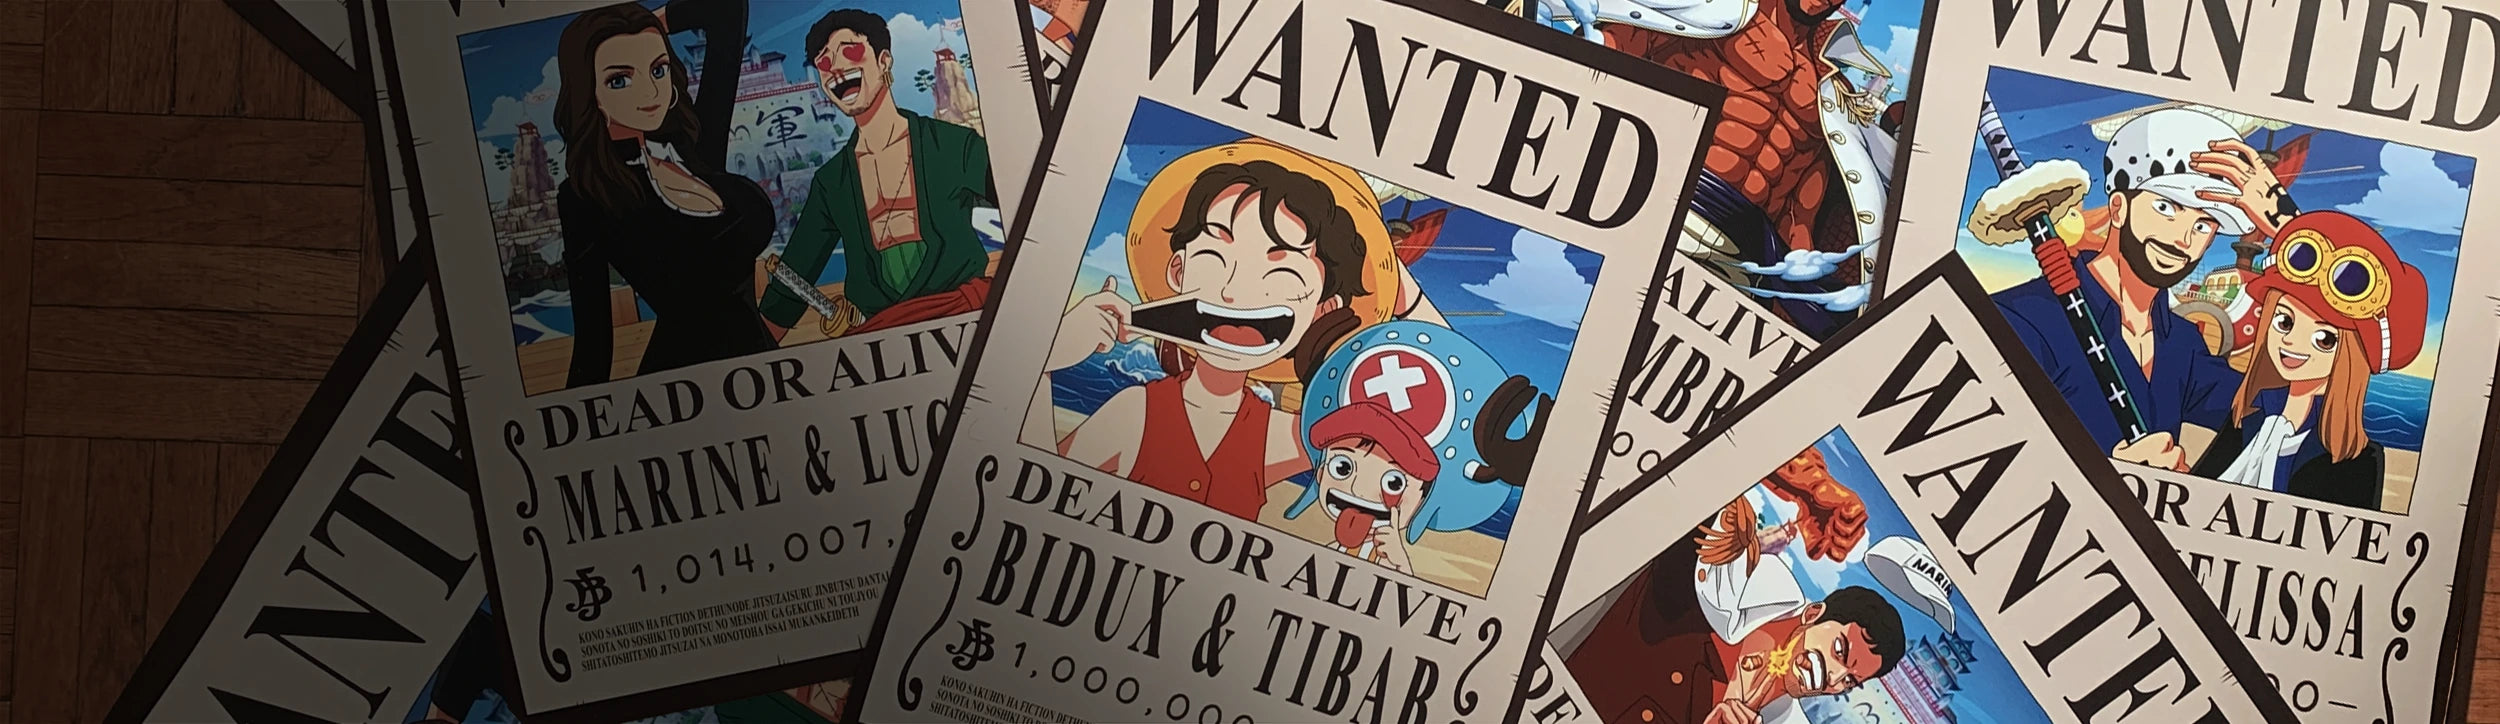 Affiches One Piece Wanted Personnalisées